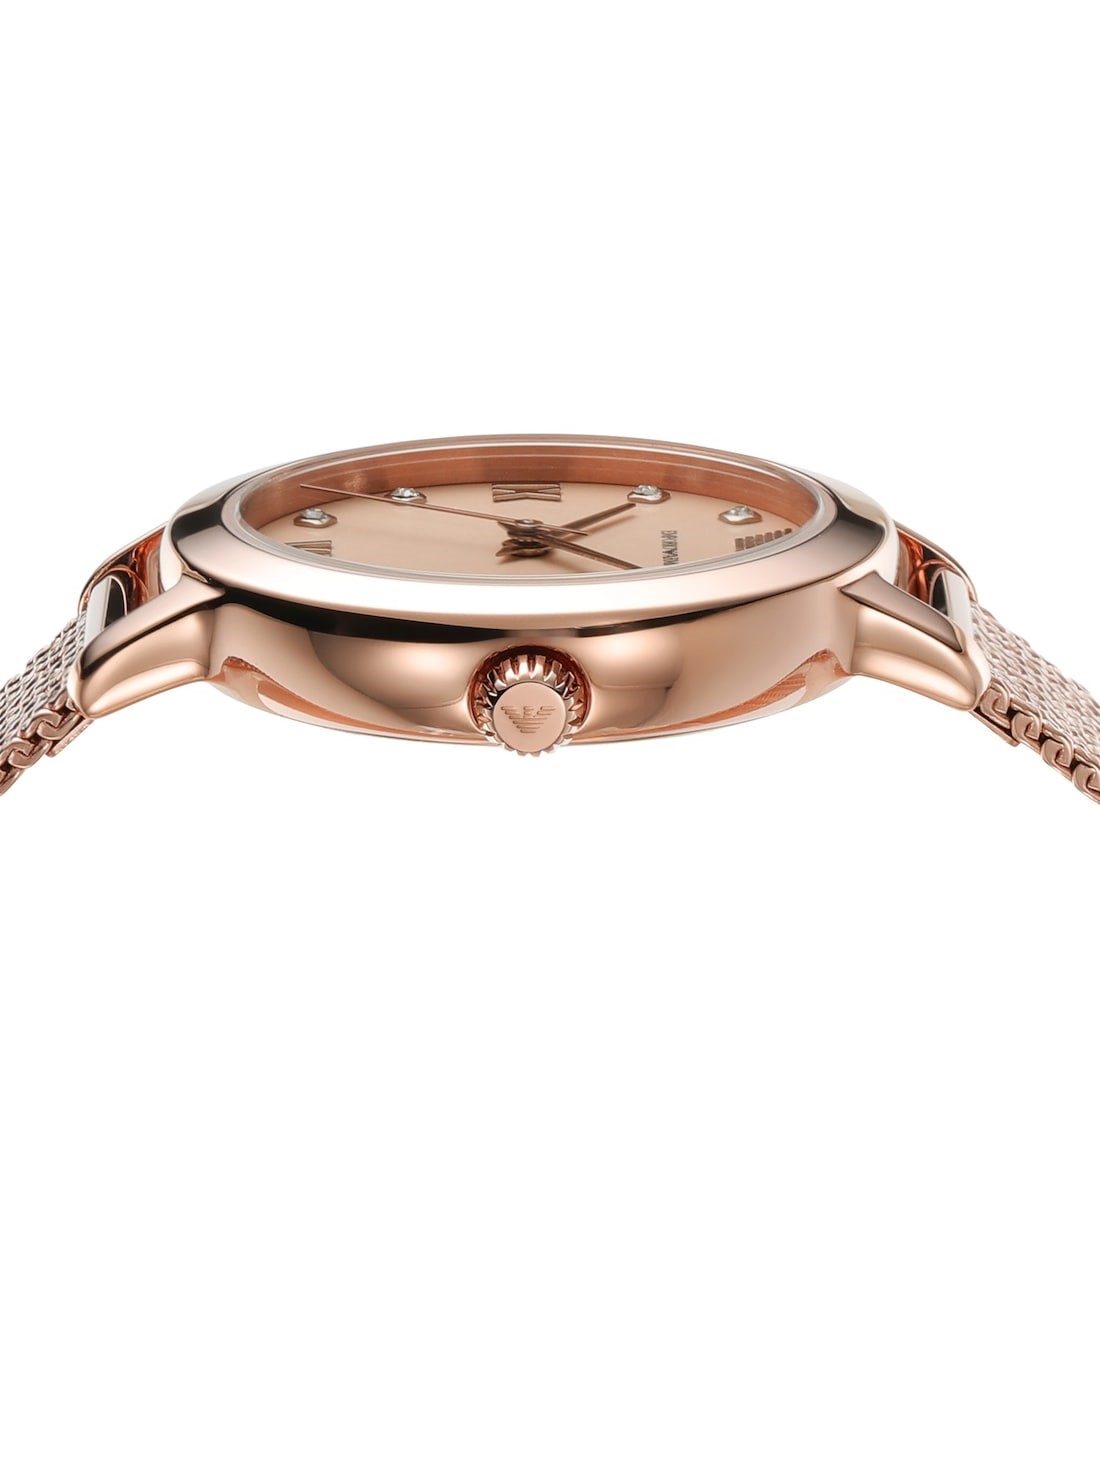 Emporio Armani Rose Gold Watch AR11512 - Watch Station India